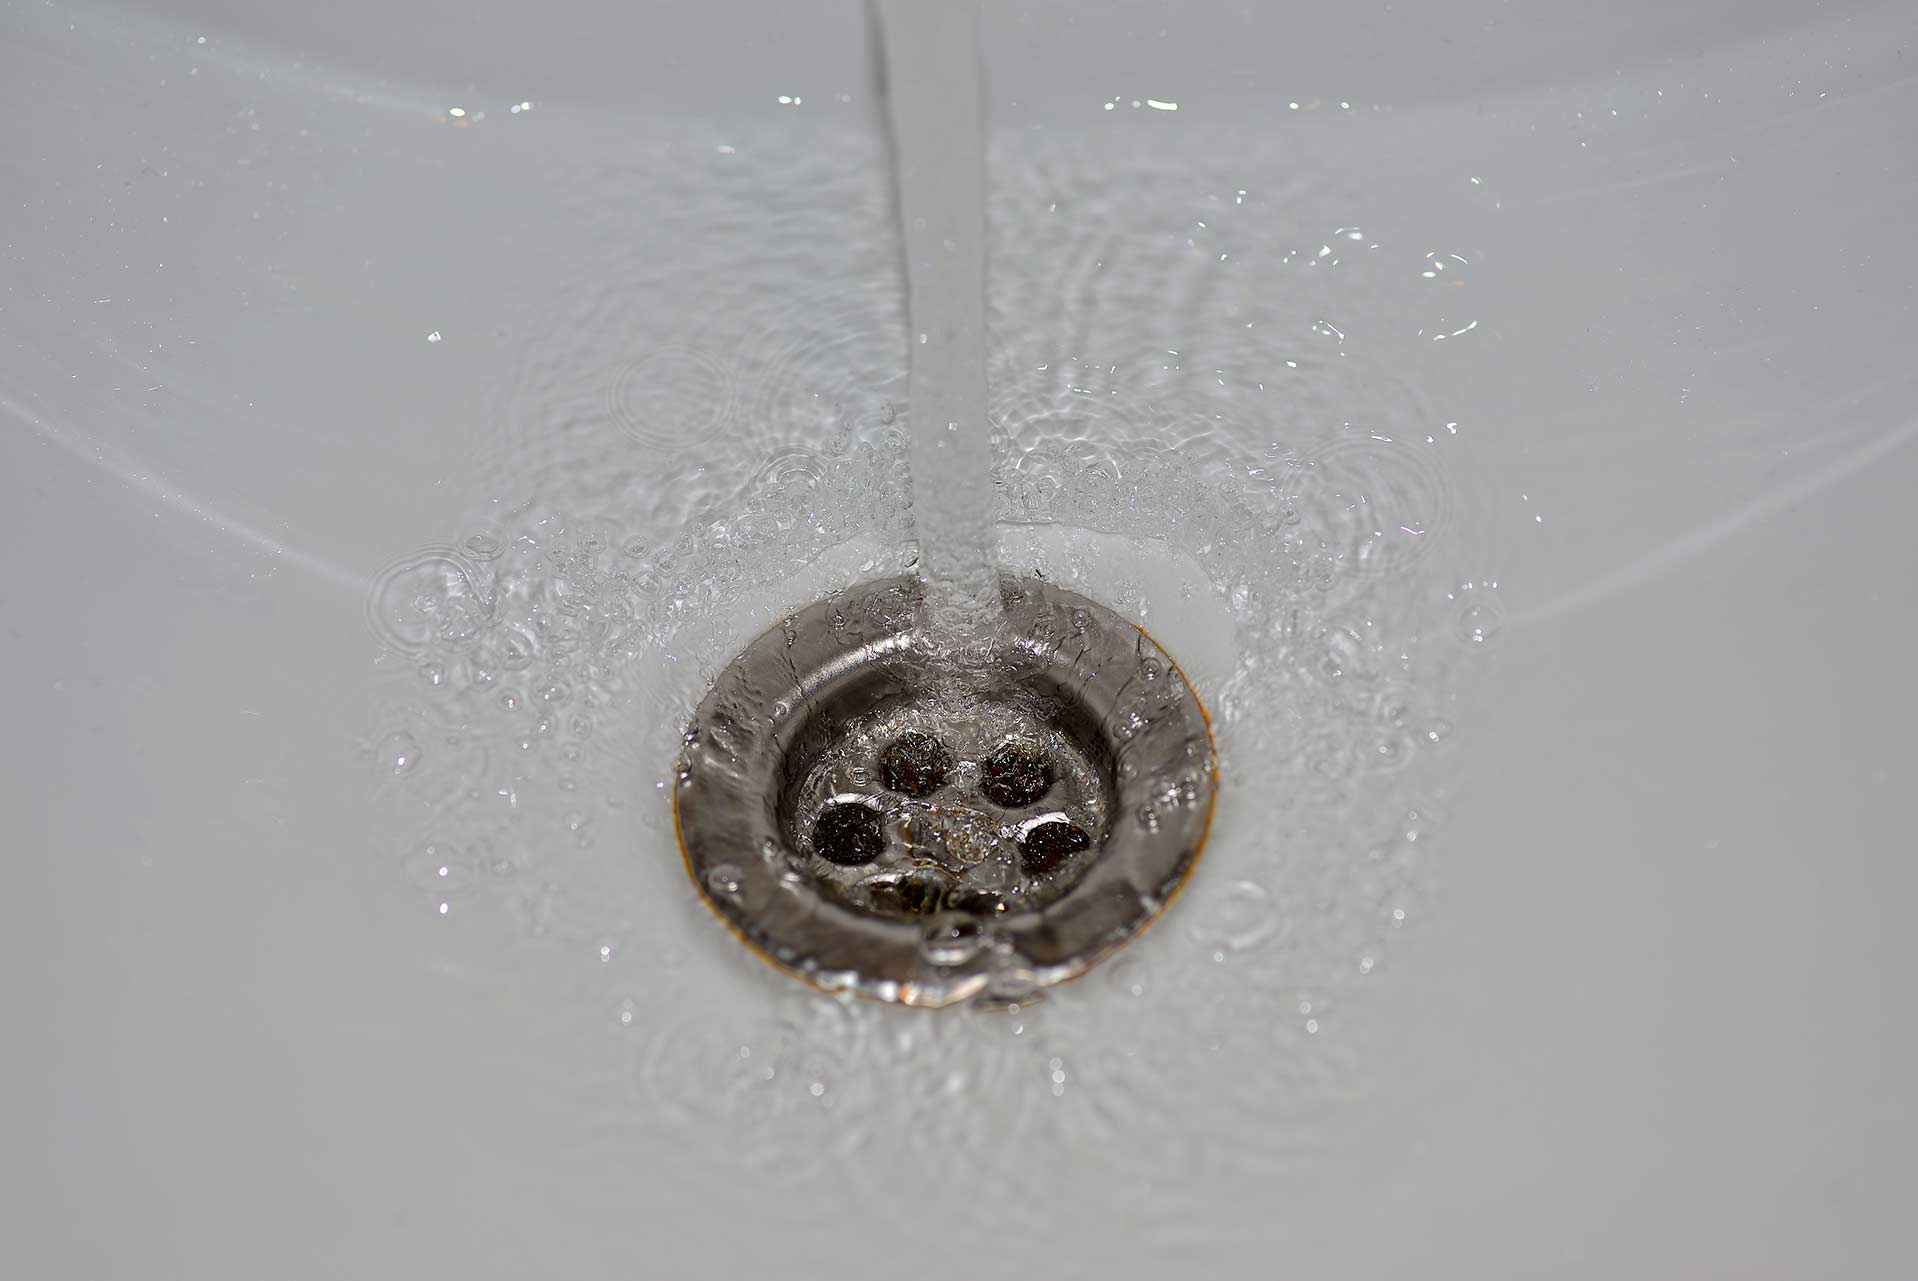 A2B Drains provides services to unblock blocked sinks and drains for properties in Macclesfield.